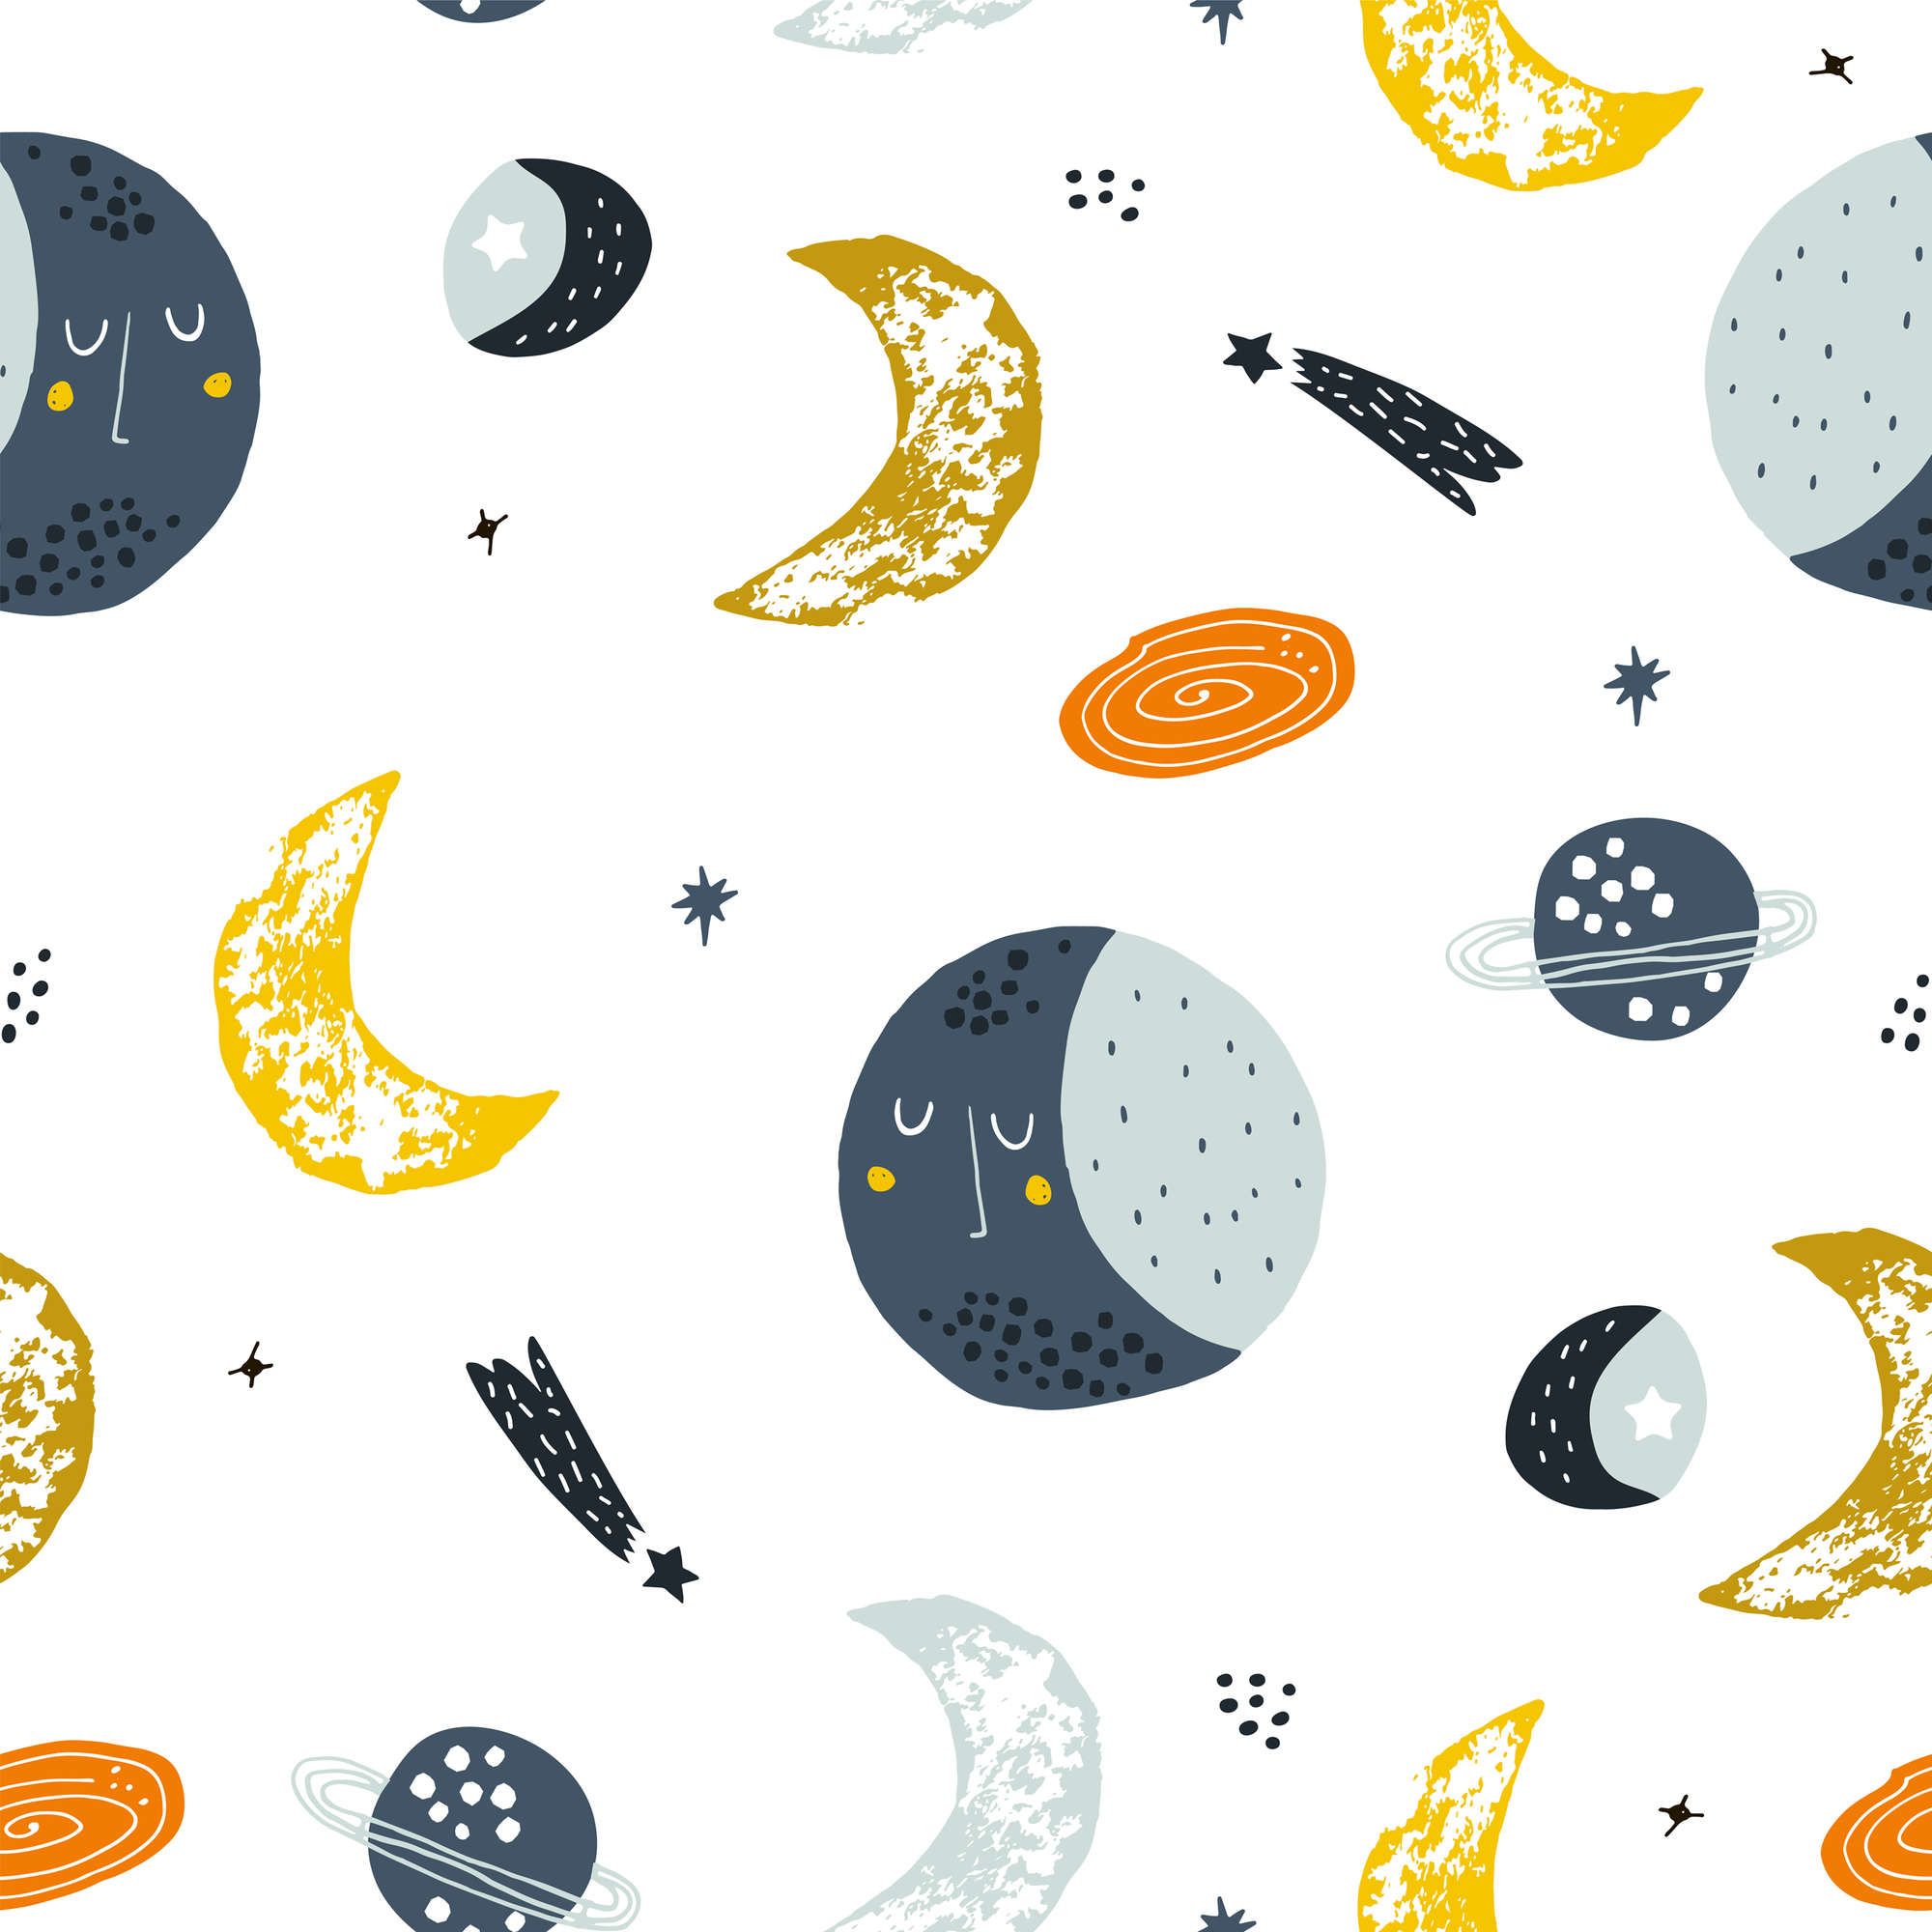             Photo wallpaper with moons and shooting stars - Smooth & slightly shiny non-woven
        